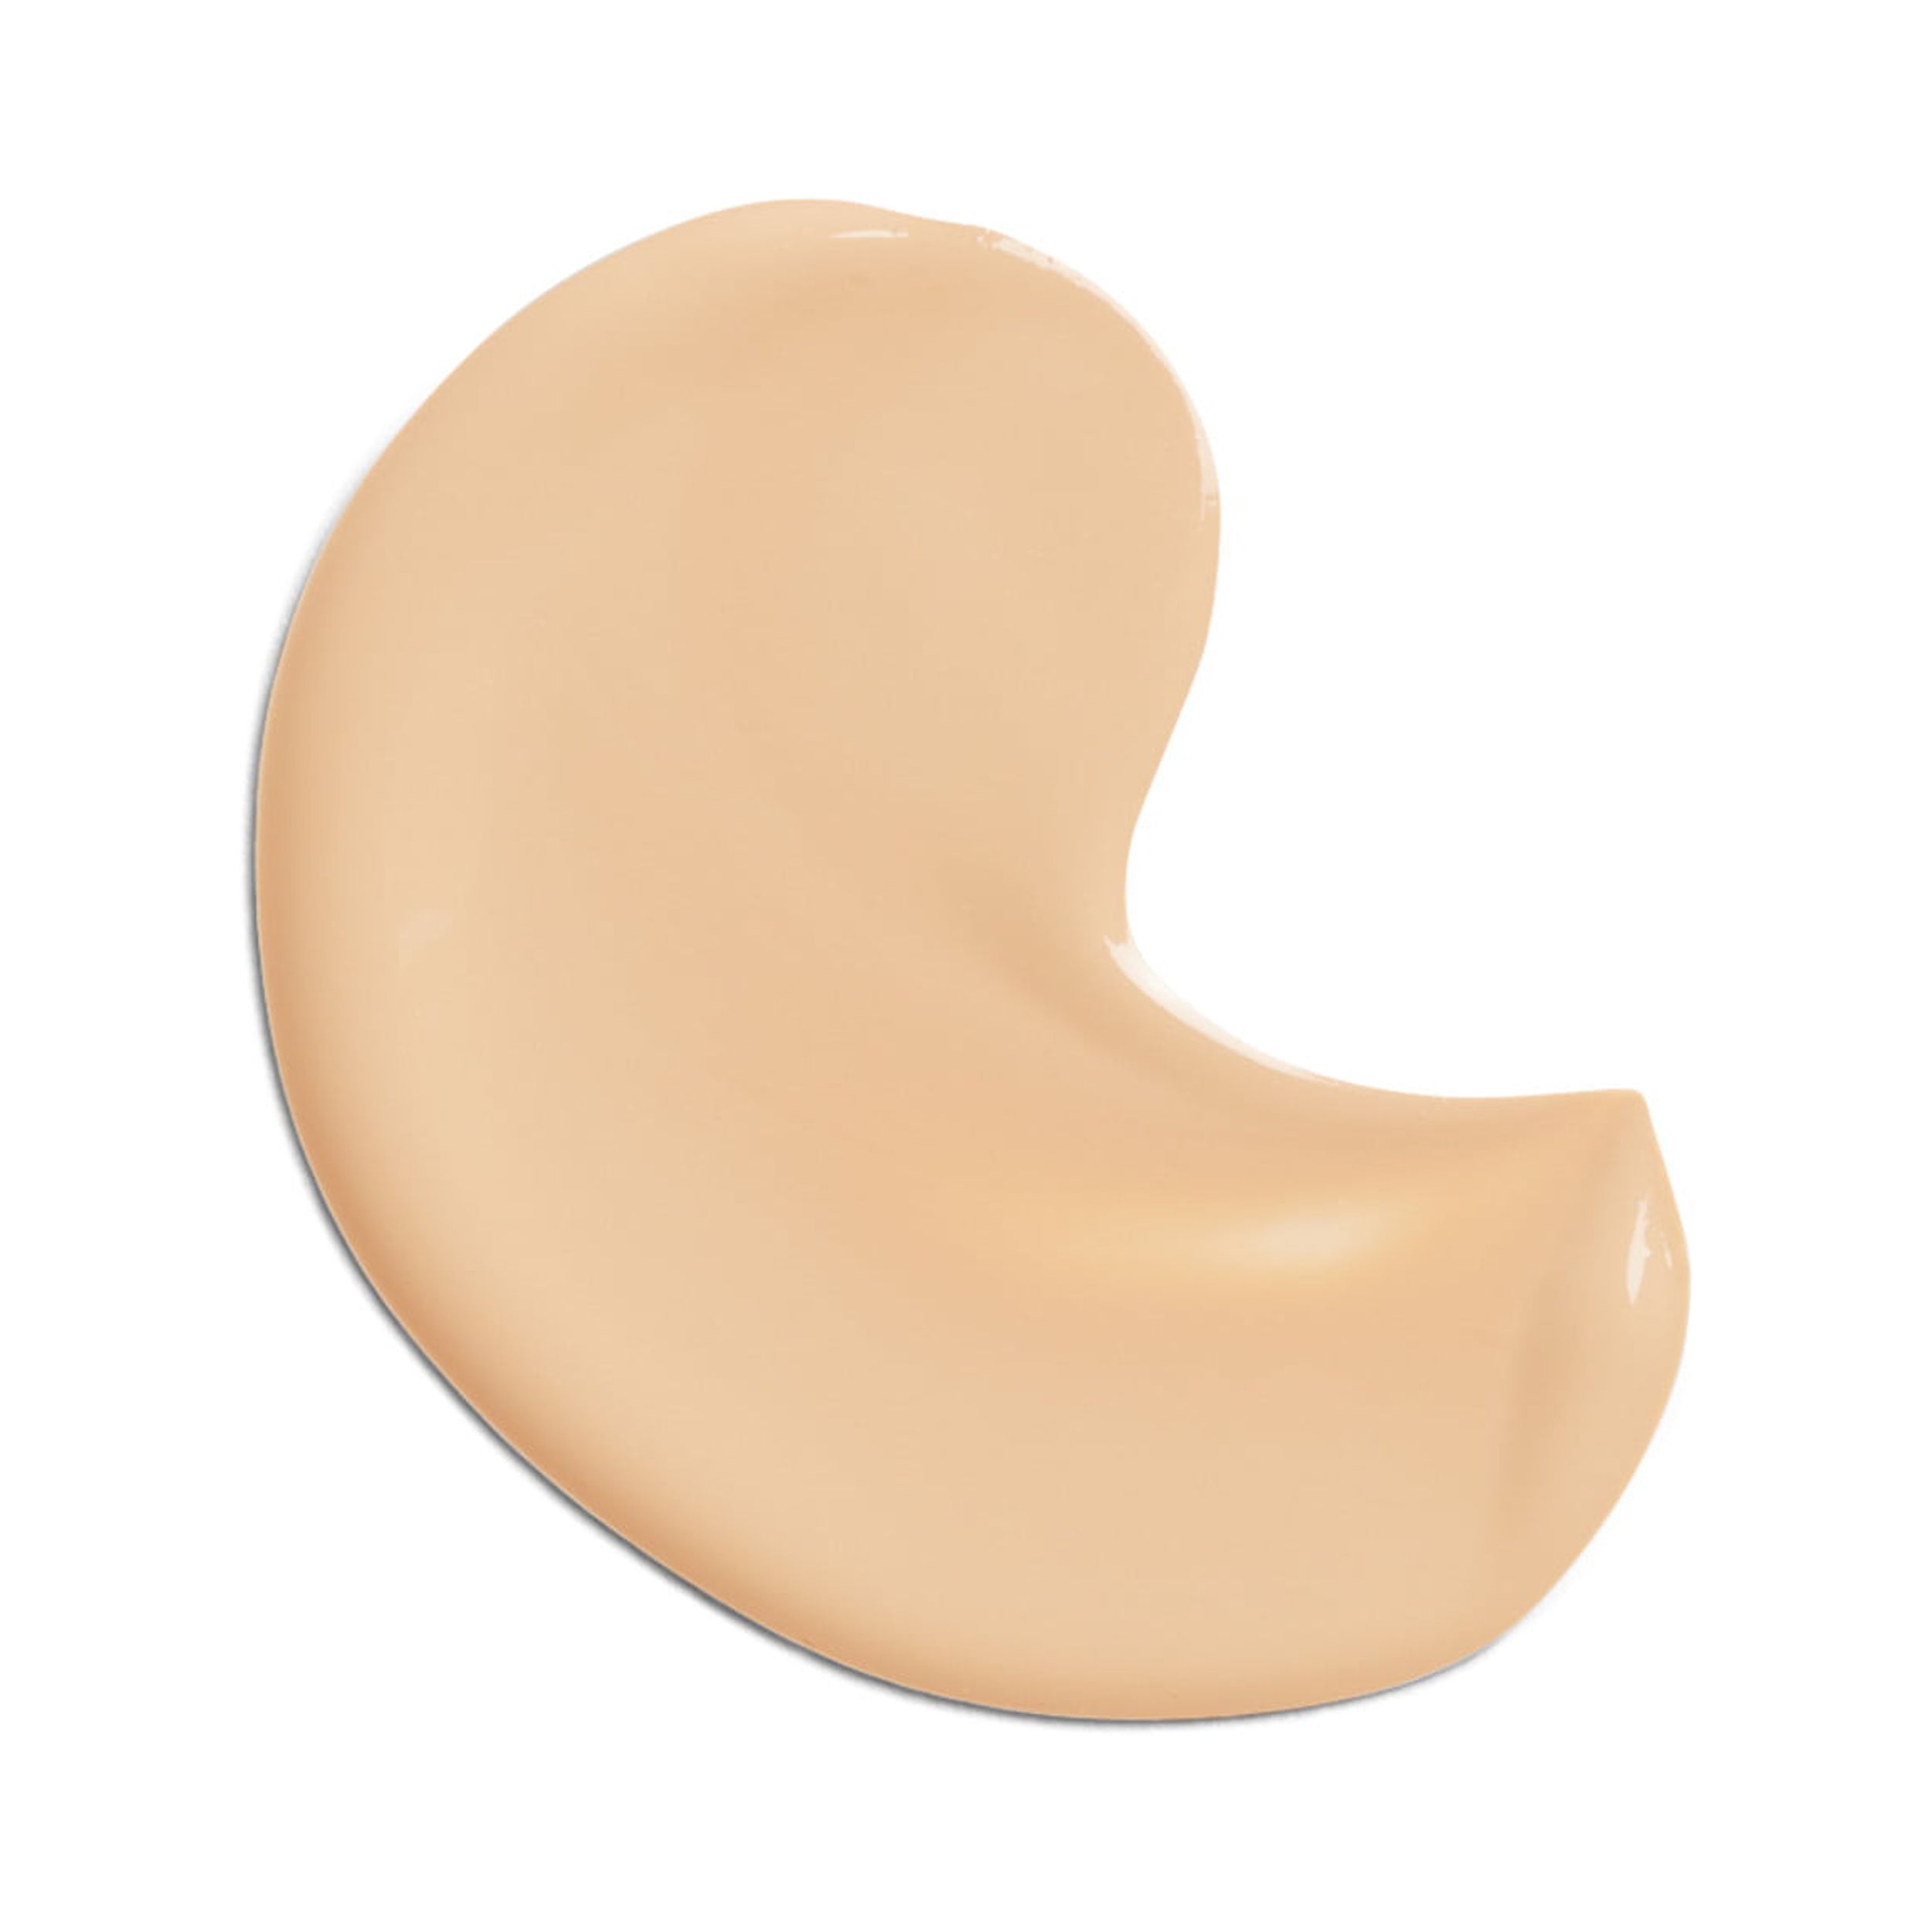 COVERGIRL Clean Liquid Foundation, 125 Buff Beige, 1 fl oz, Liquid Foundation, Moisturizing Foundation, Lightweight Foundation, Cruelty-Free Foundation, Unscented Foundation - image 3 of 15